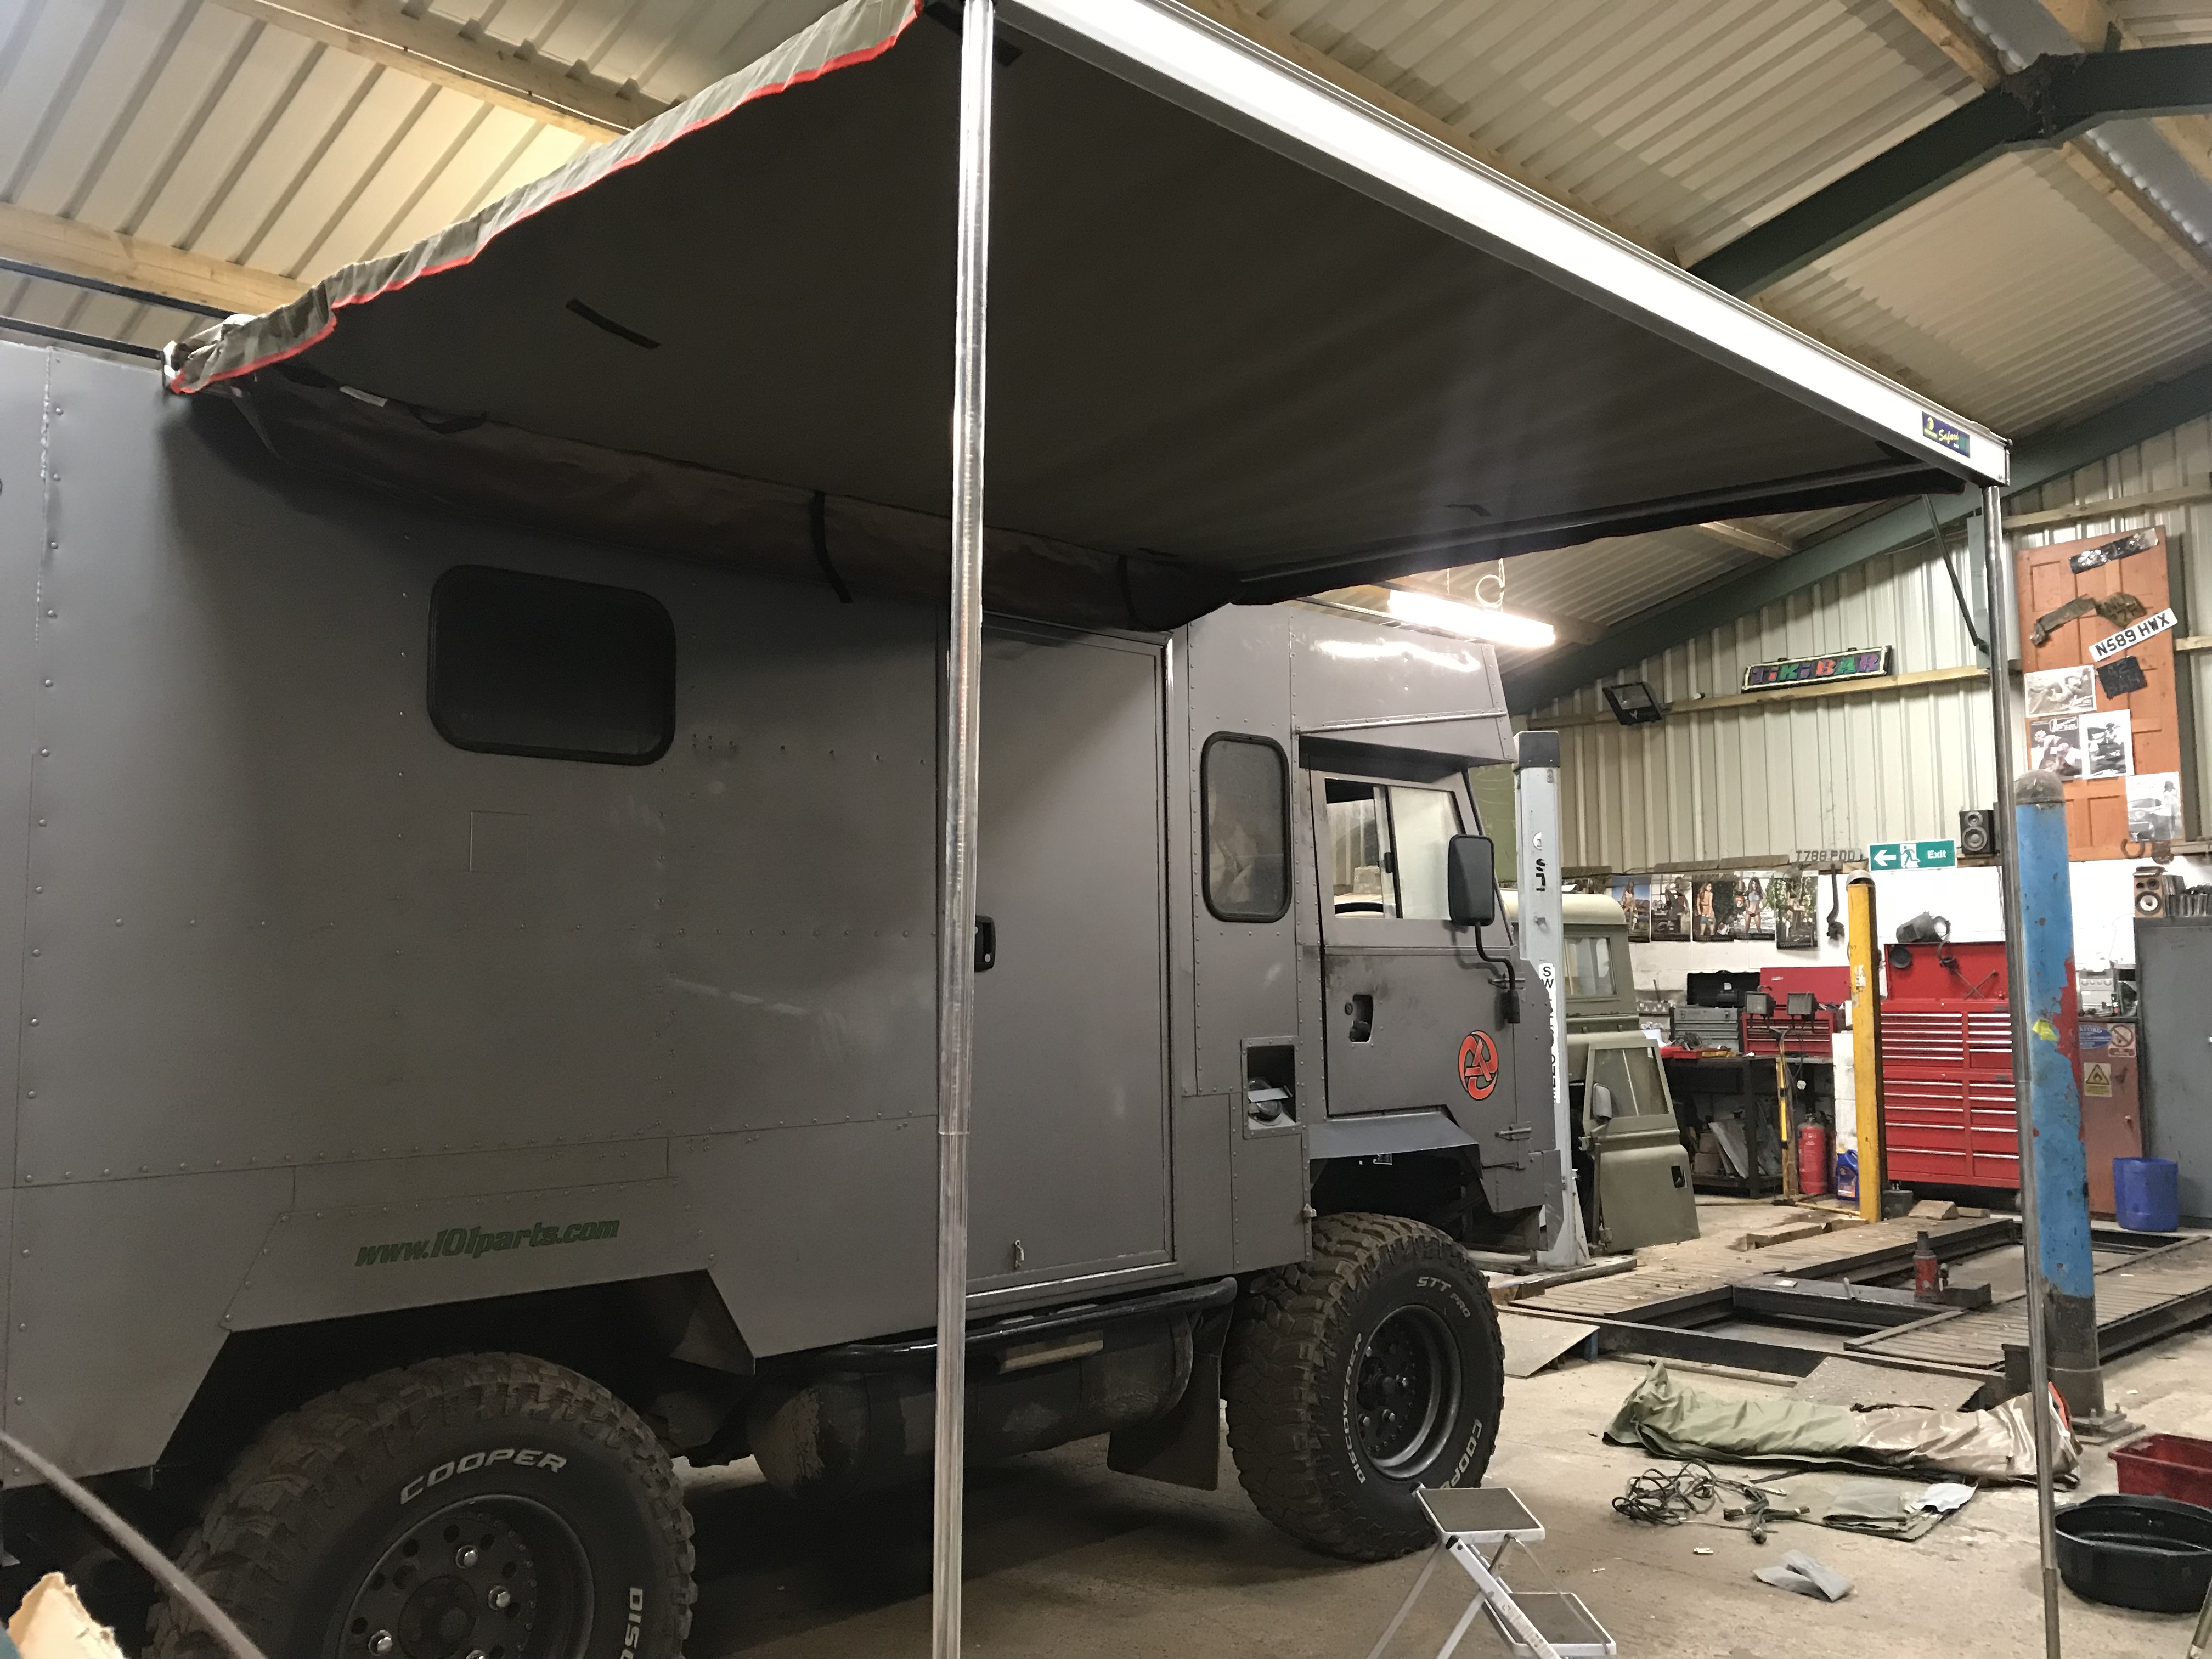 Howling Moon 21 Awning For Sale 101 Forward Control Land Rover